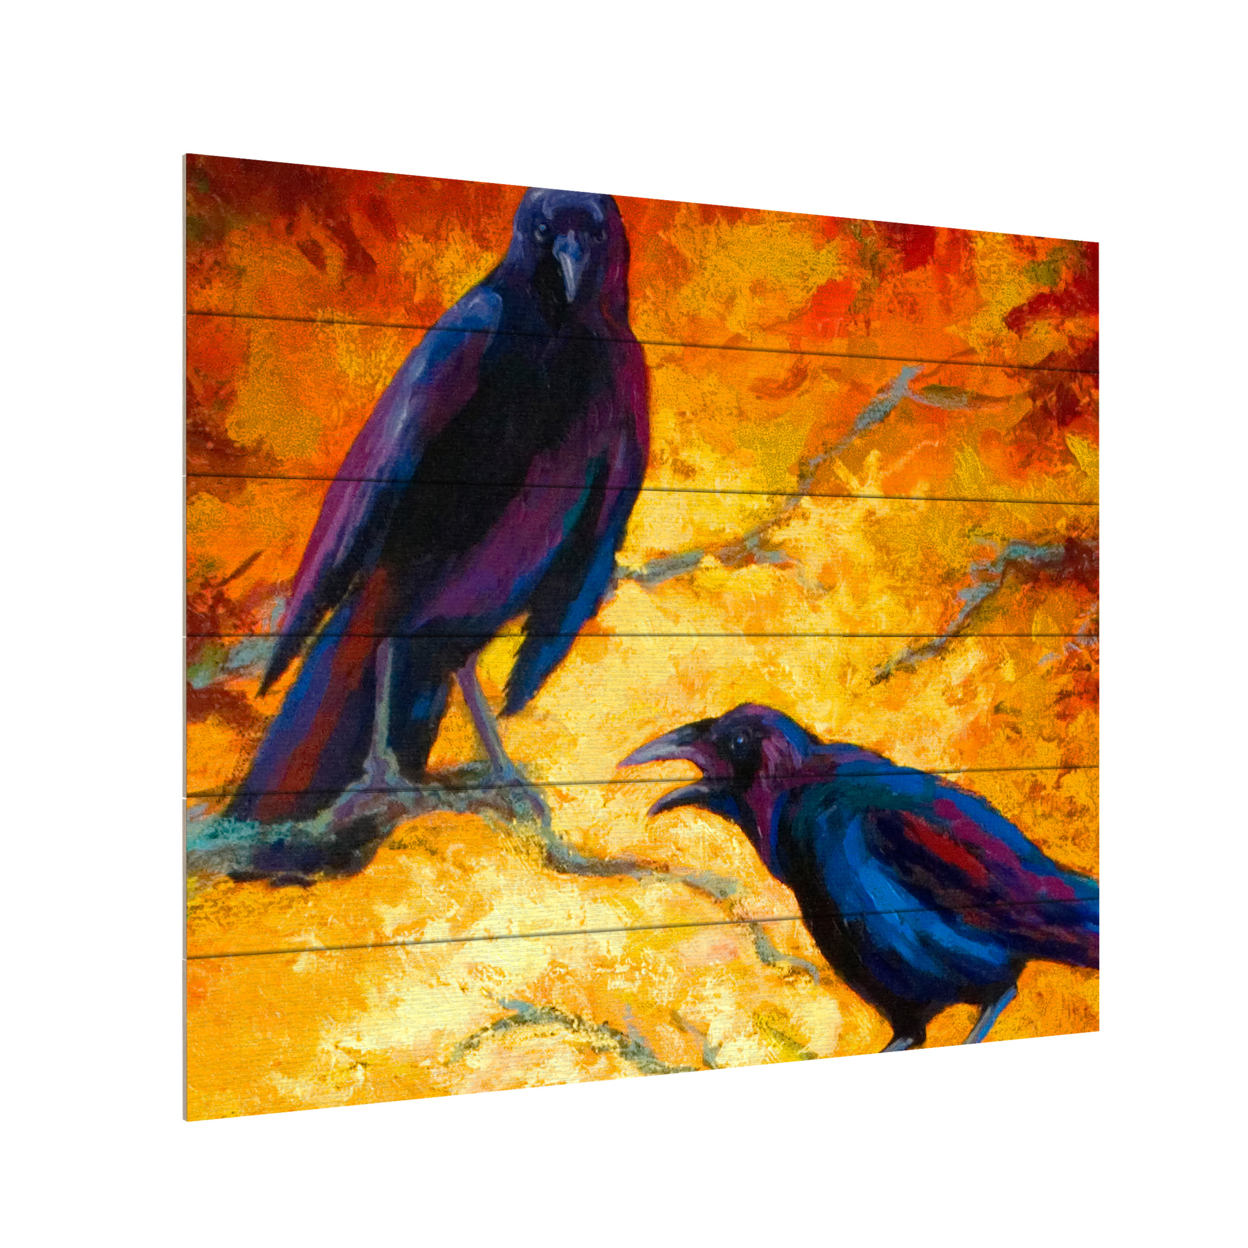 Wooden Slat Art 18 X 22 Inches Titled Crows 9 Ready To Hang Home Decor Picture